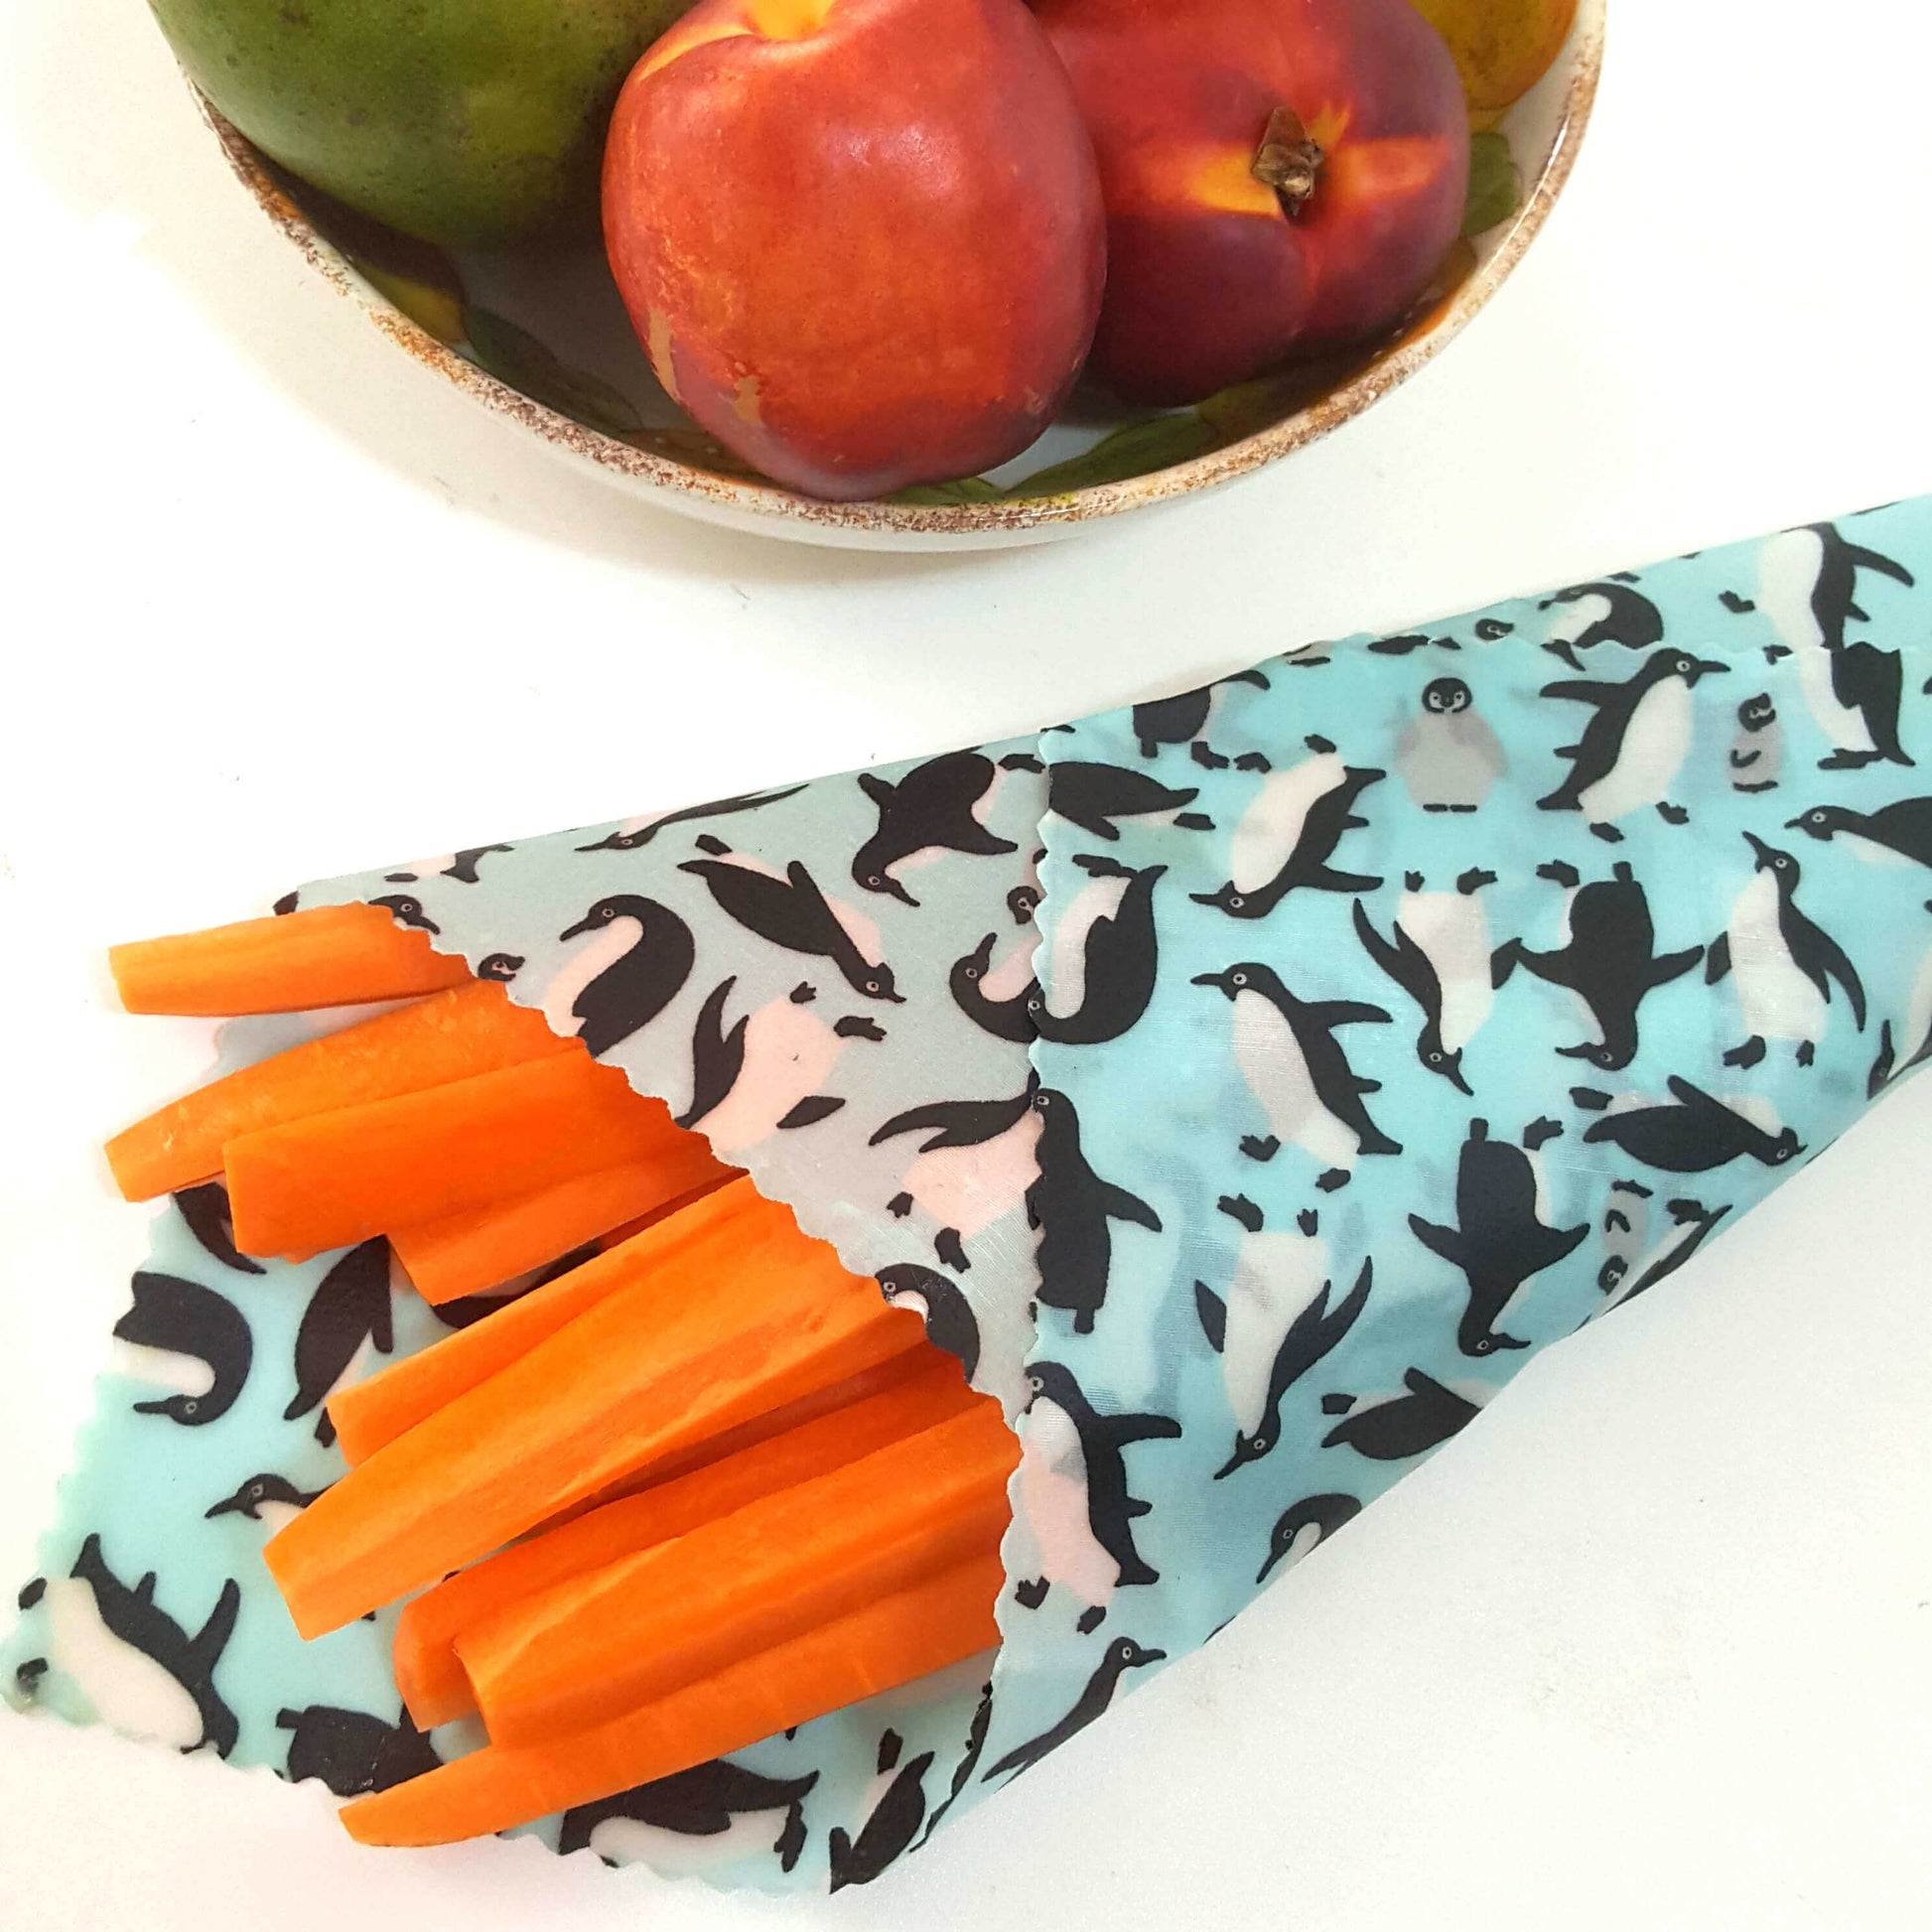 Reusable Beeswax Food Wraps 100% Hand Made in the UK by Honey Bee Good. Planet-Kind single large beeswax wrap in Penguins pattern as flatlay with carrots